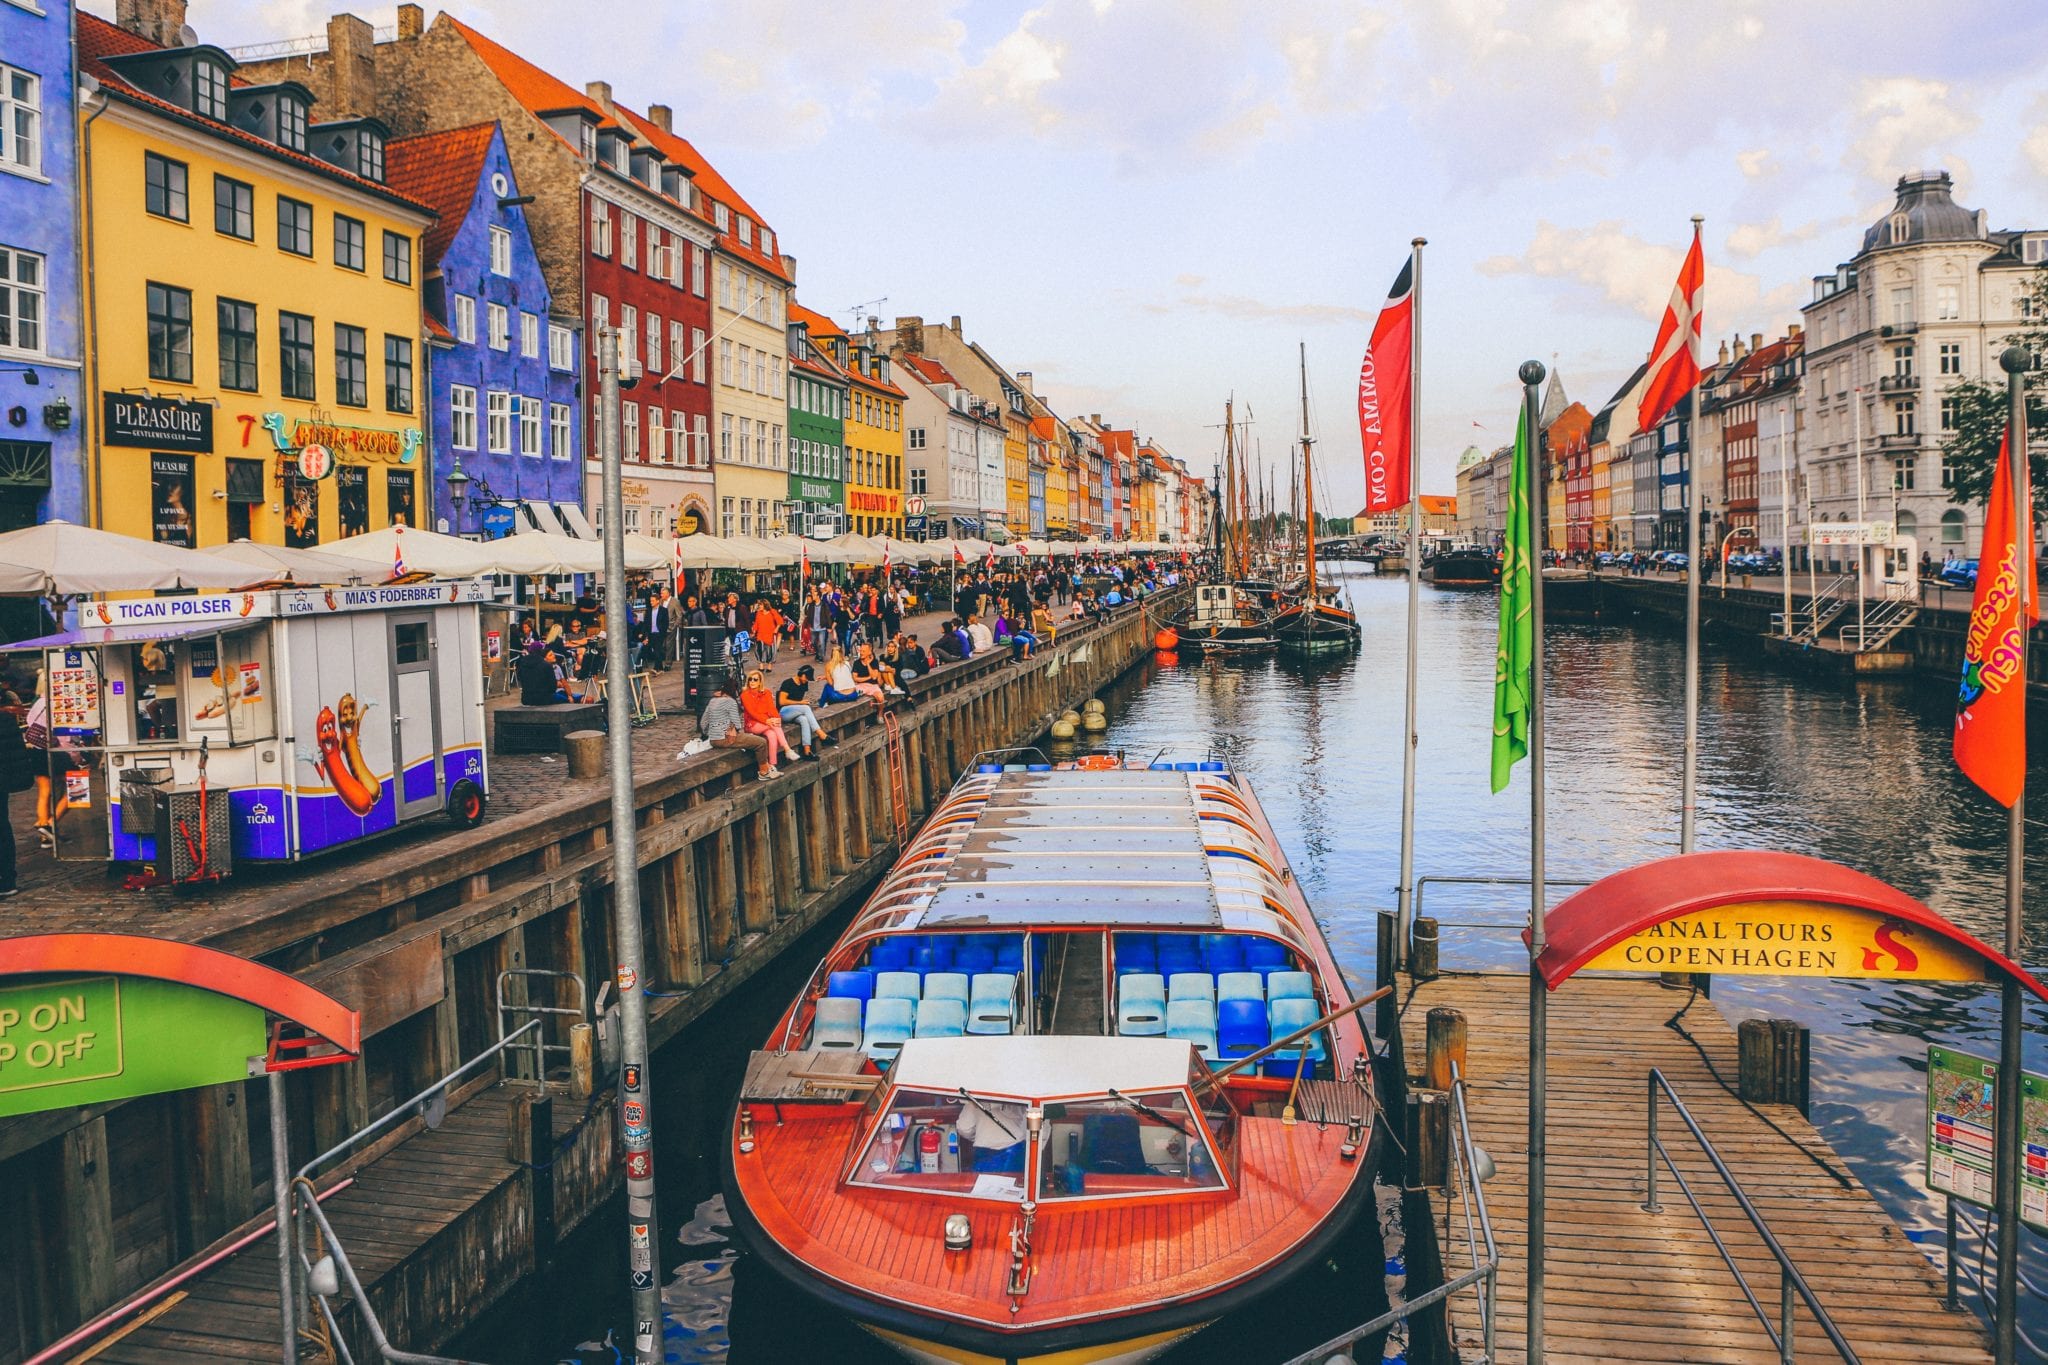 What Insurance Coverage Do You Need to Have in Denmark?